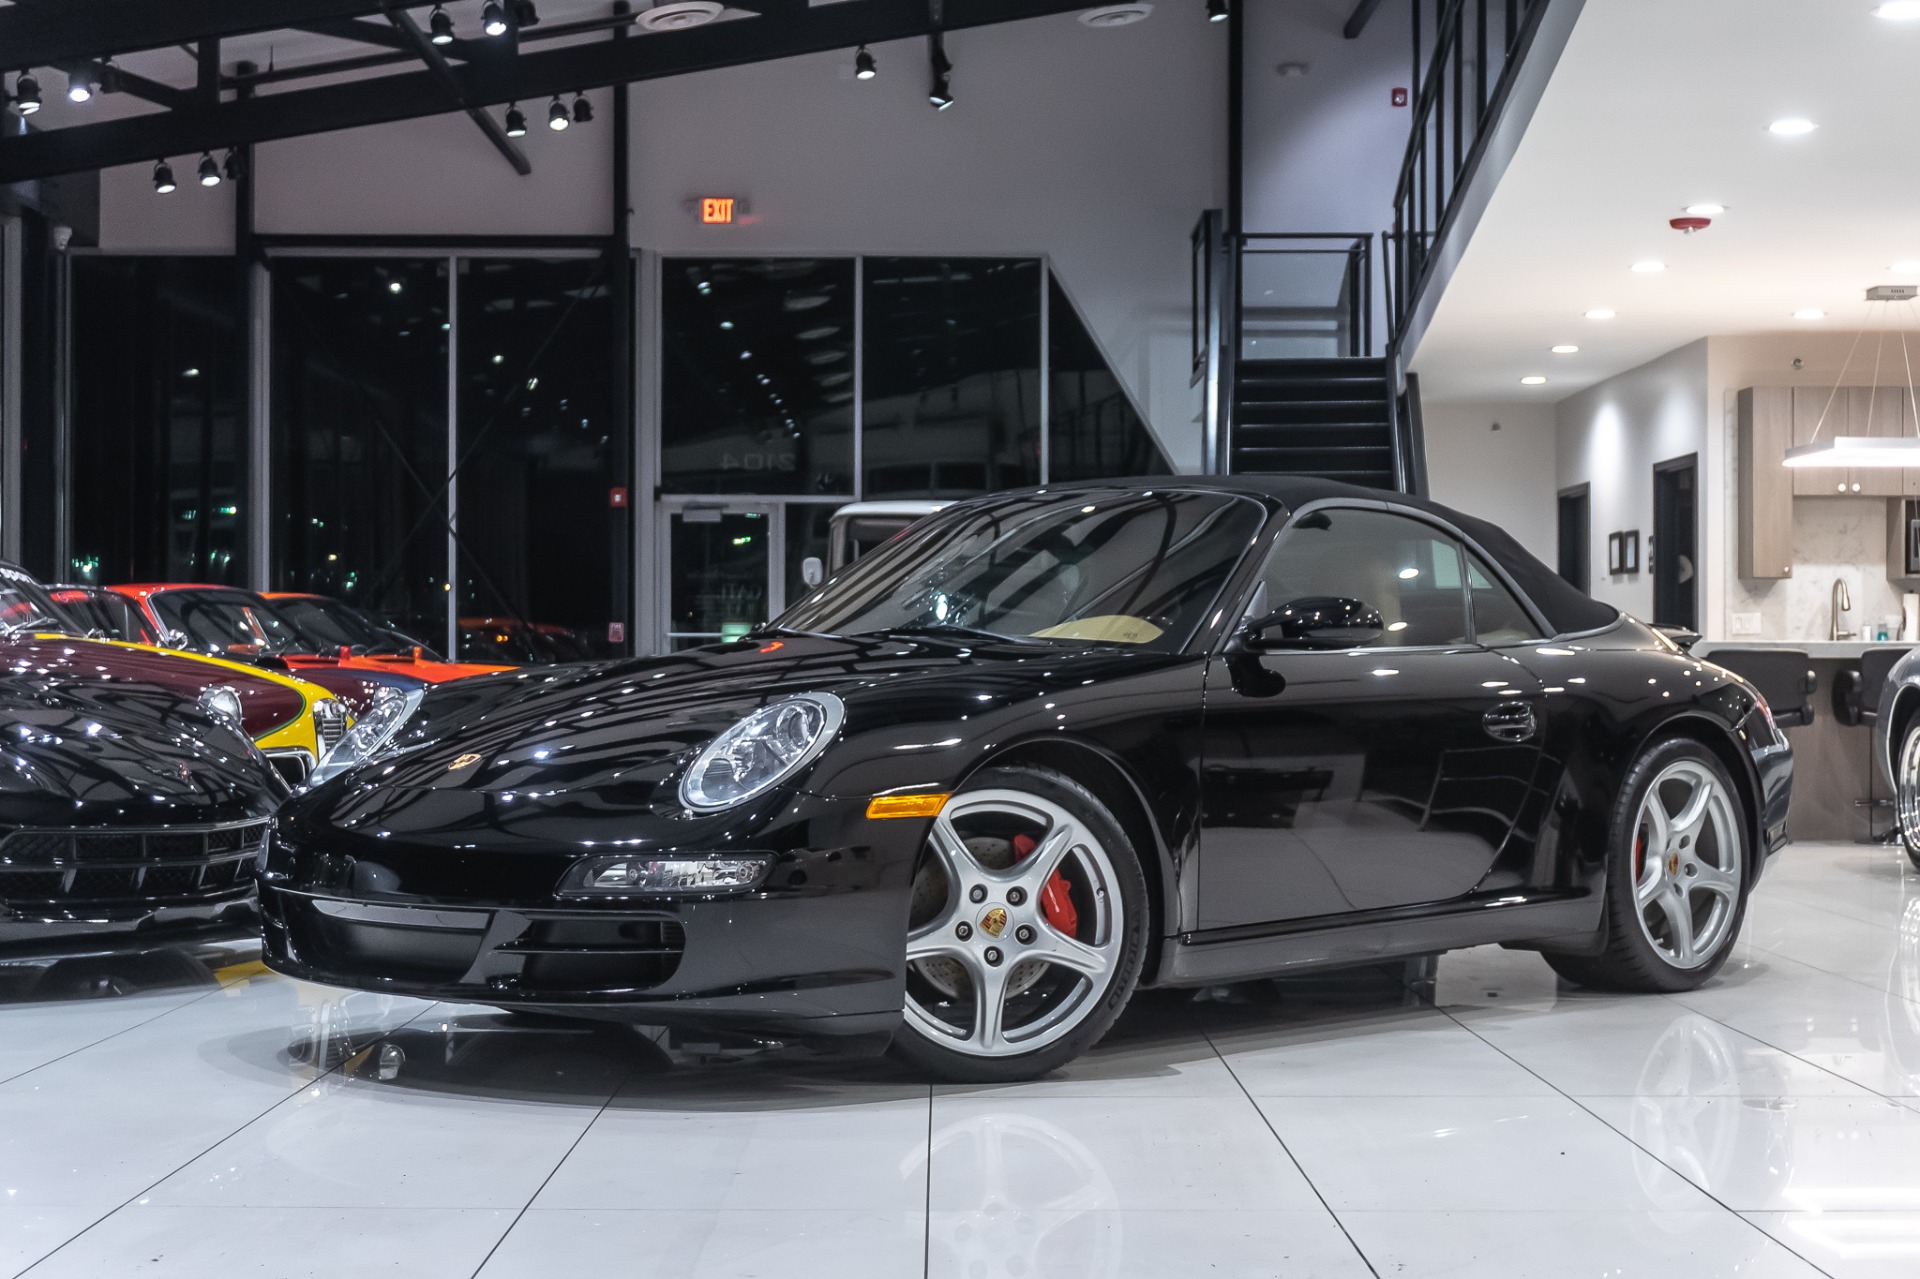 Used-2006-Porsche-911-Carrera-S-CABRIOLET-6-SPEED-BOSE-SOUND-NAV-HEATED-FRONT-SEATS